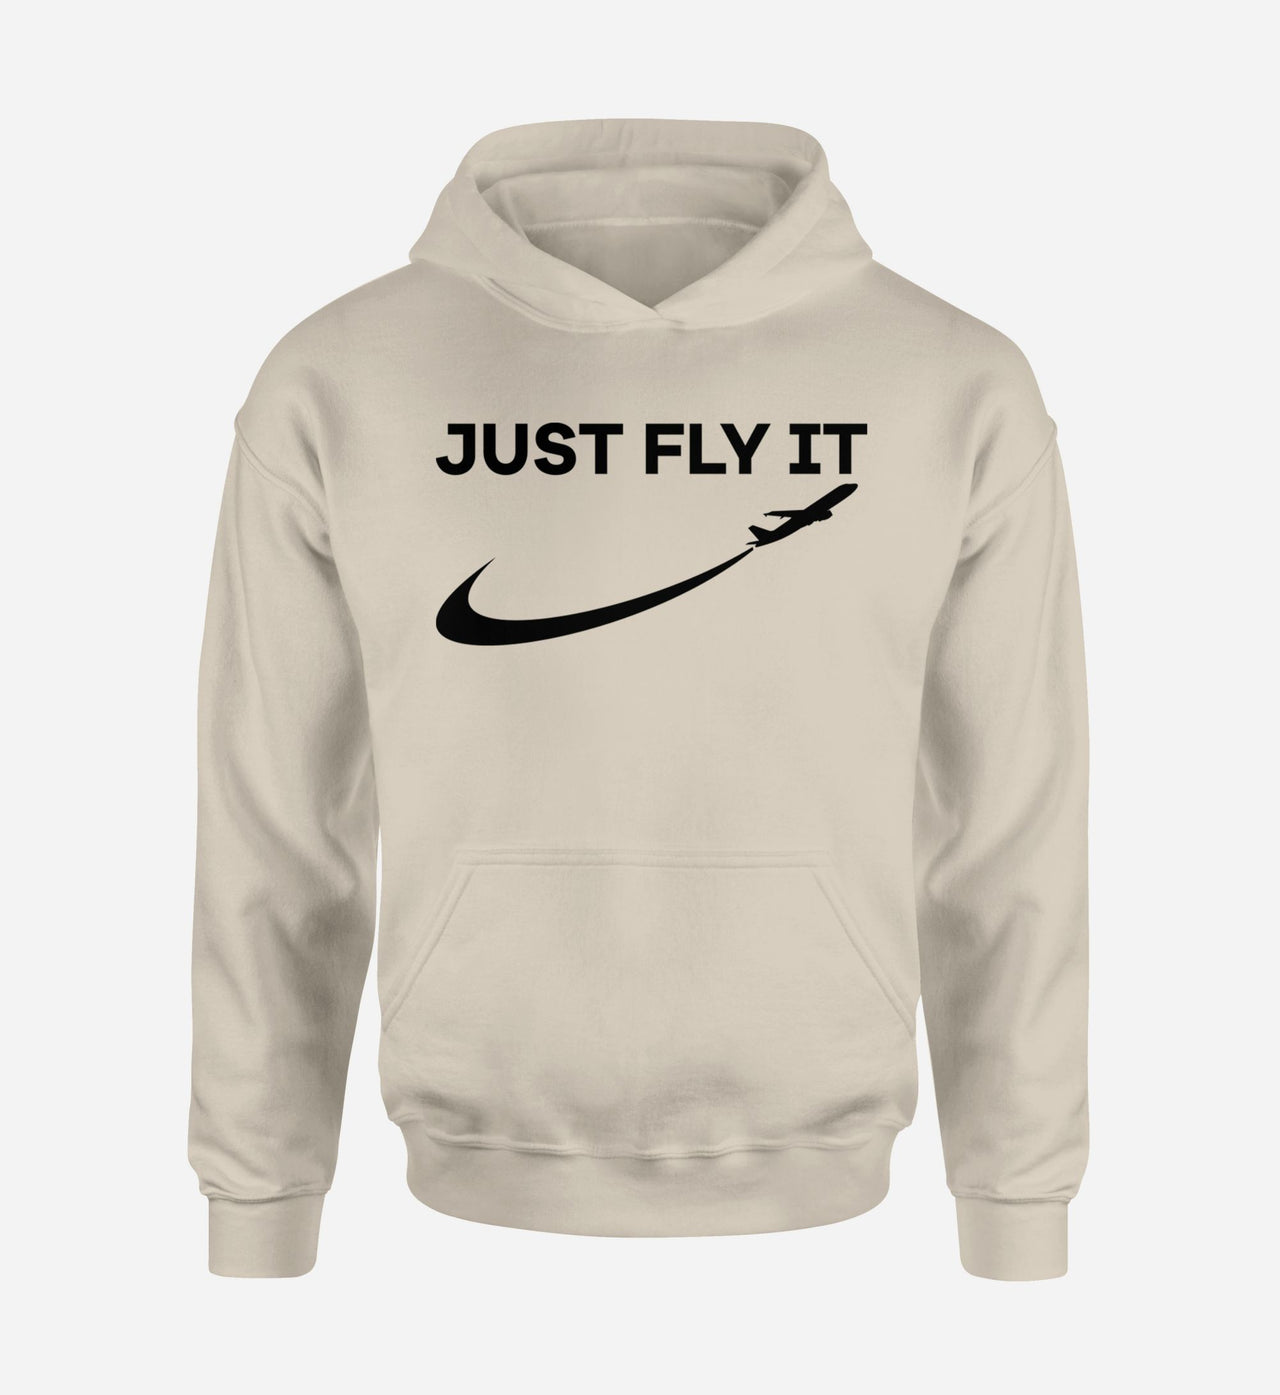 Just Fly It 2 Designed Hoodies